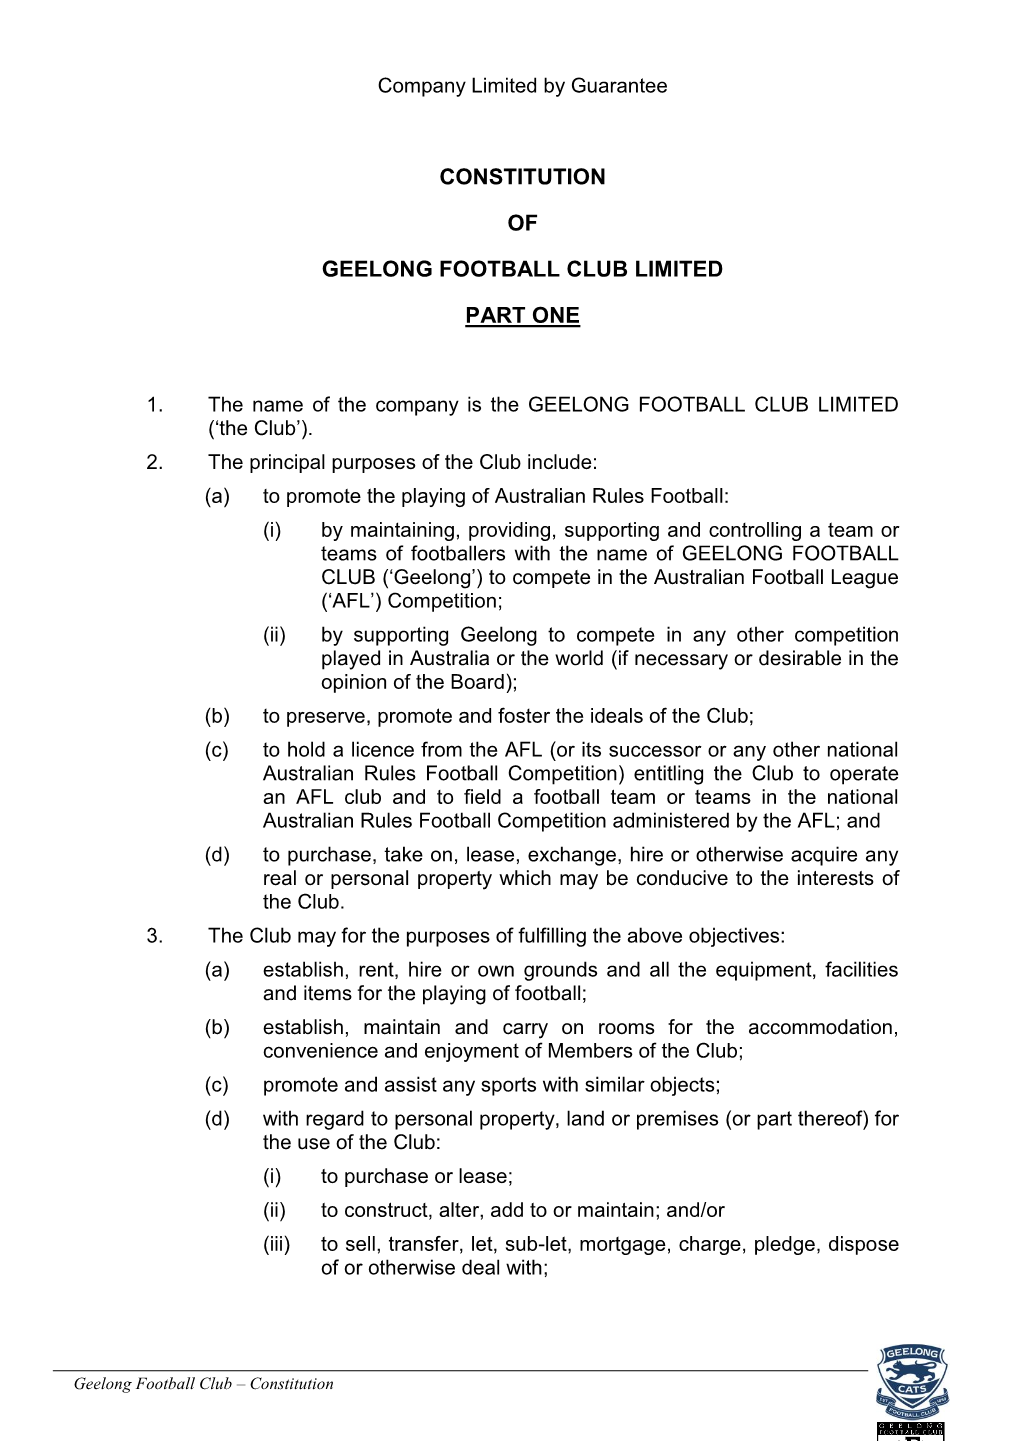 Constitution of Geelong Football Club Limited Part